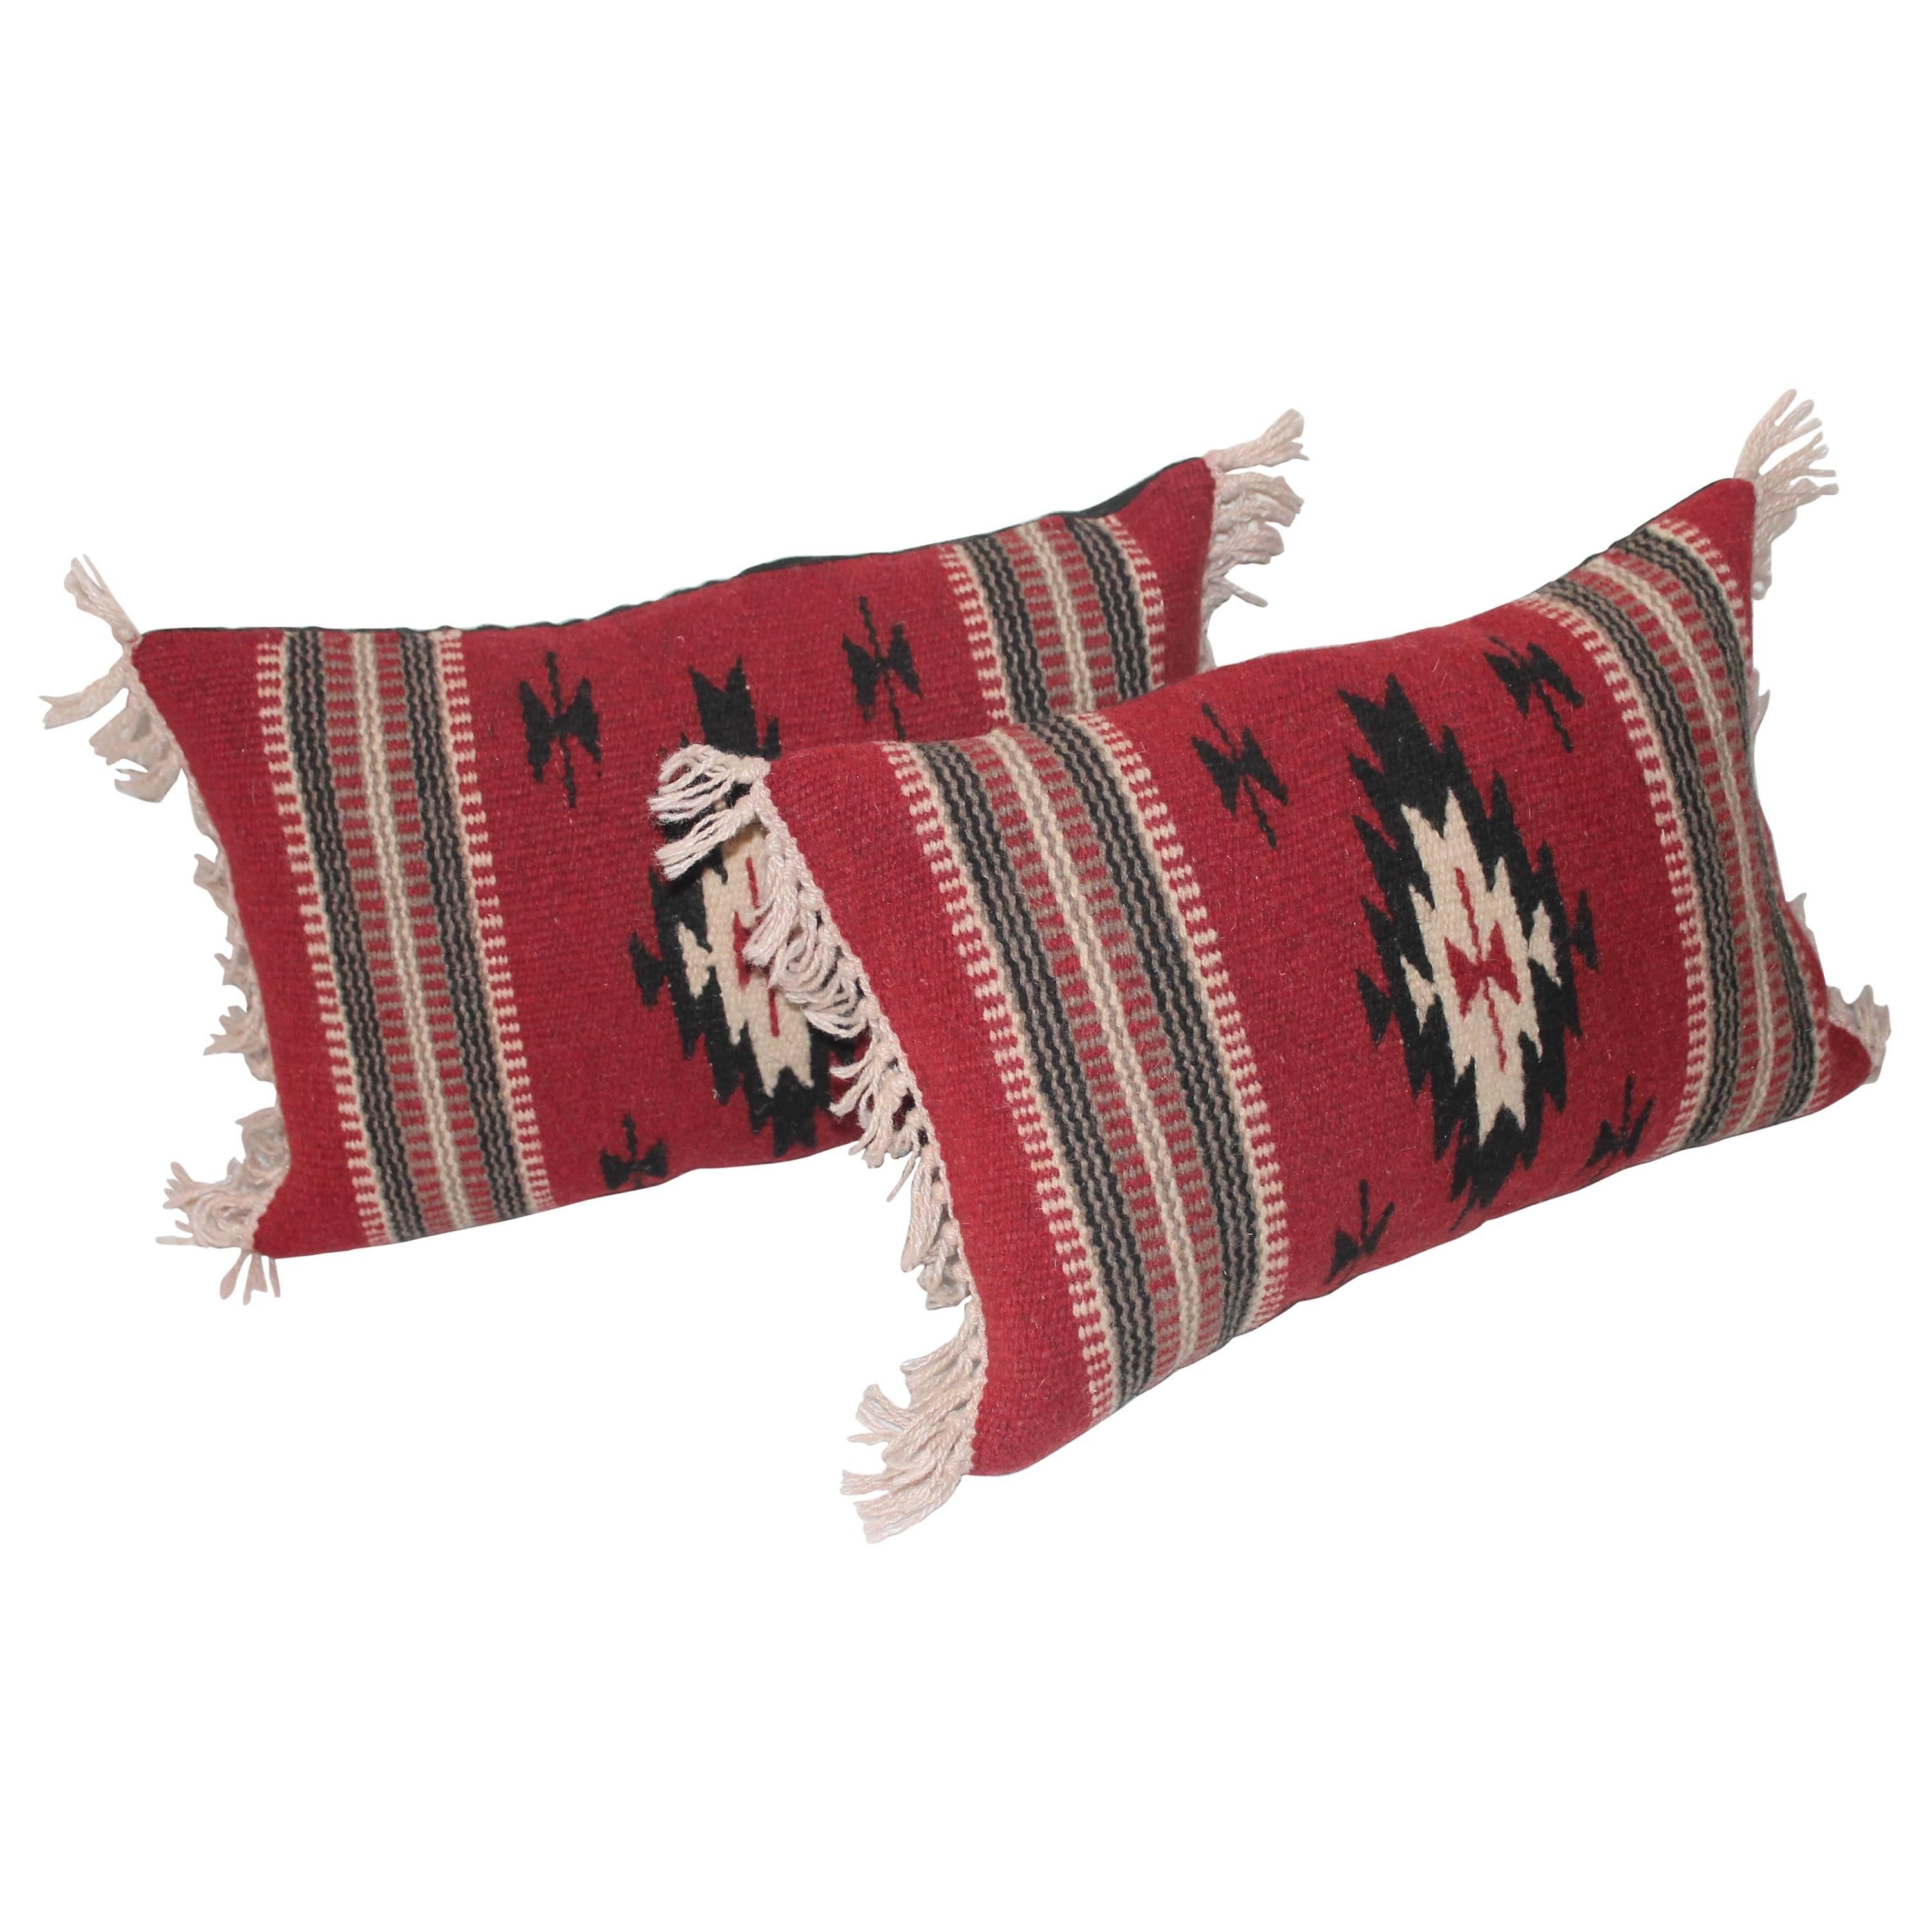 Pair of Geometric Indian Weaving Fringed Pillows